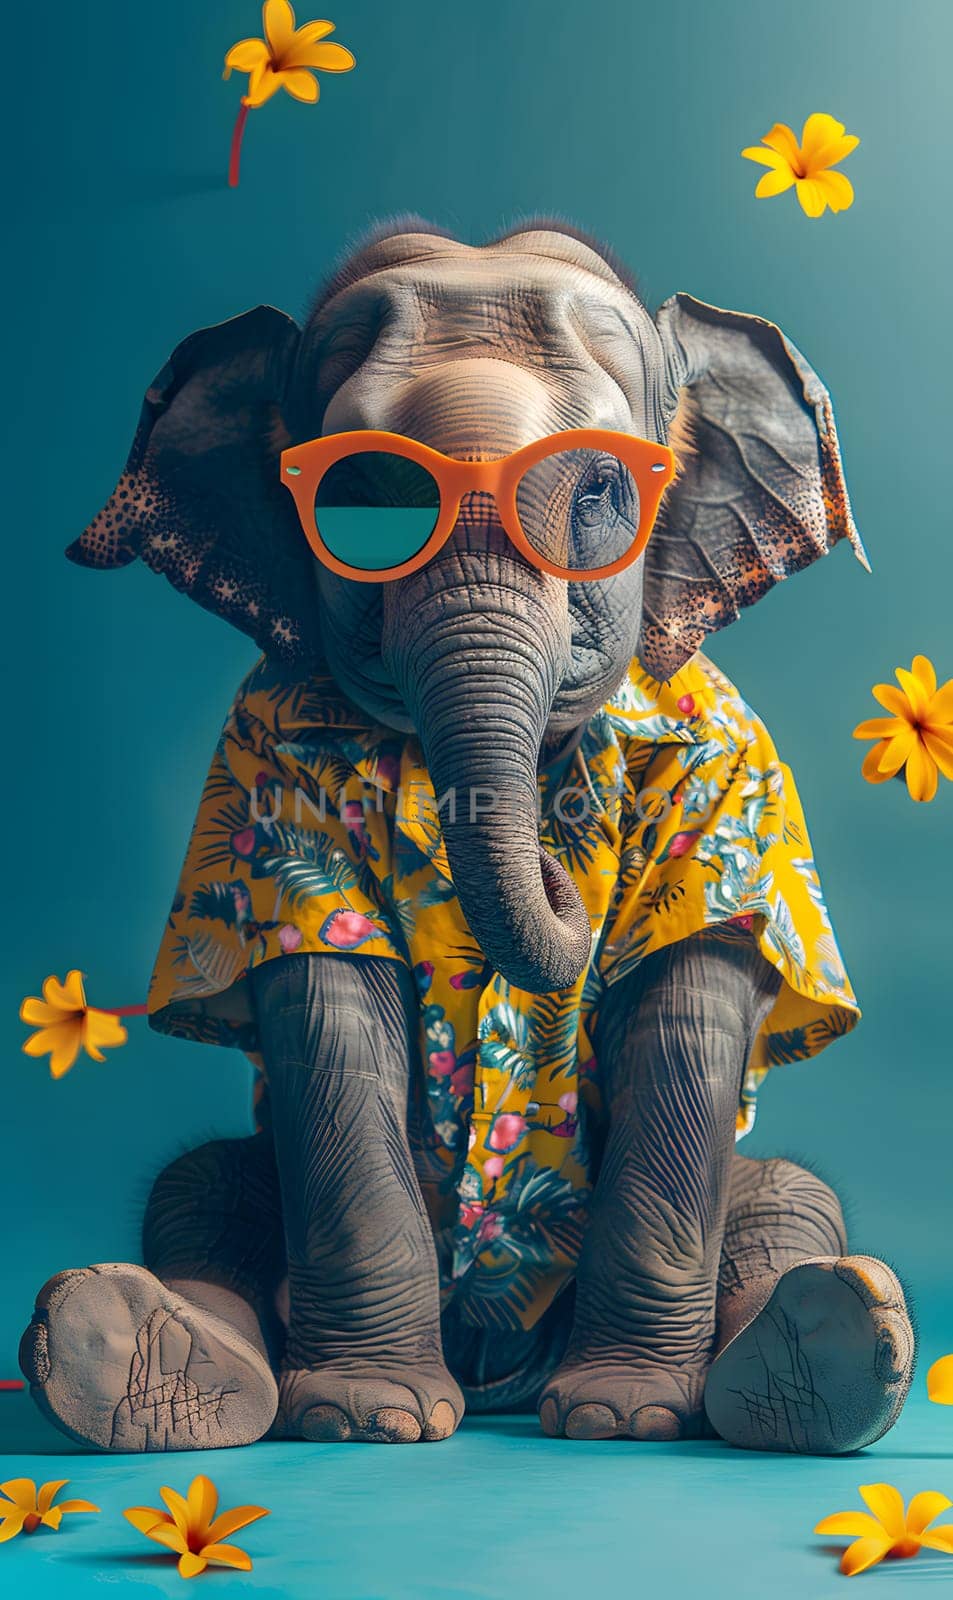 A happy elephant toy, wearing sunglasses and a yellow shirt, is sitting next to flowers in a playful display of art and creativity